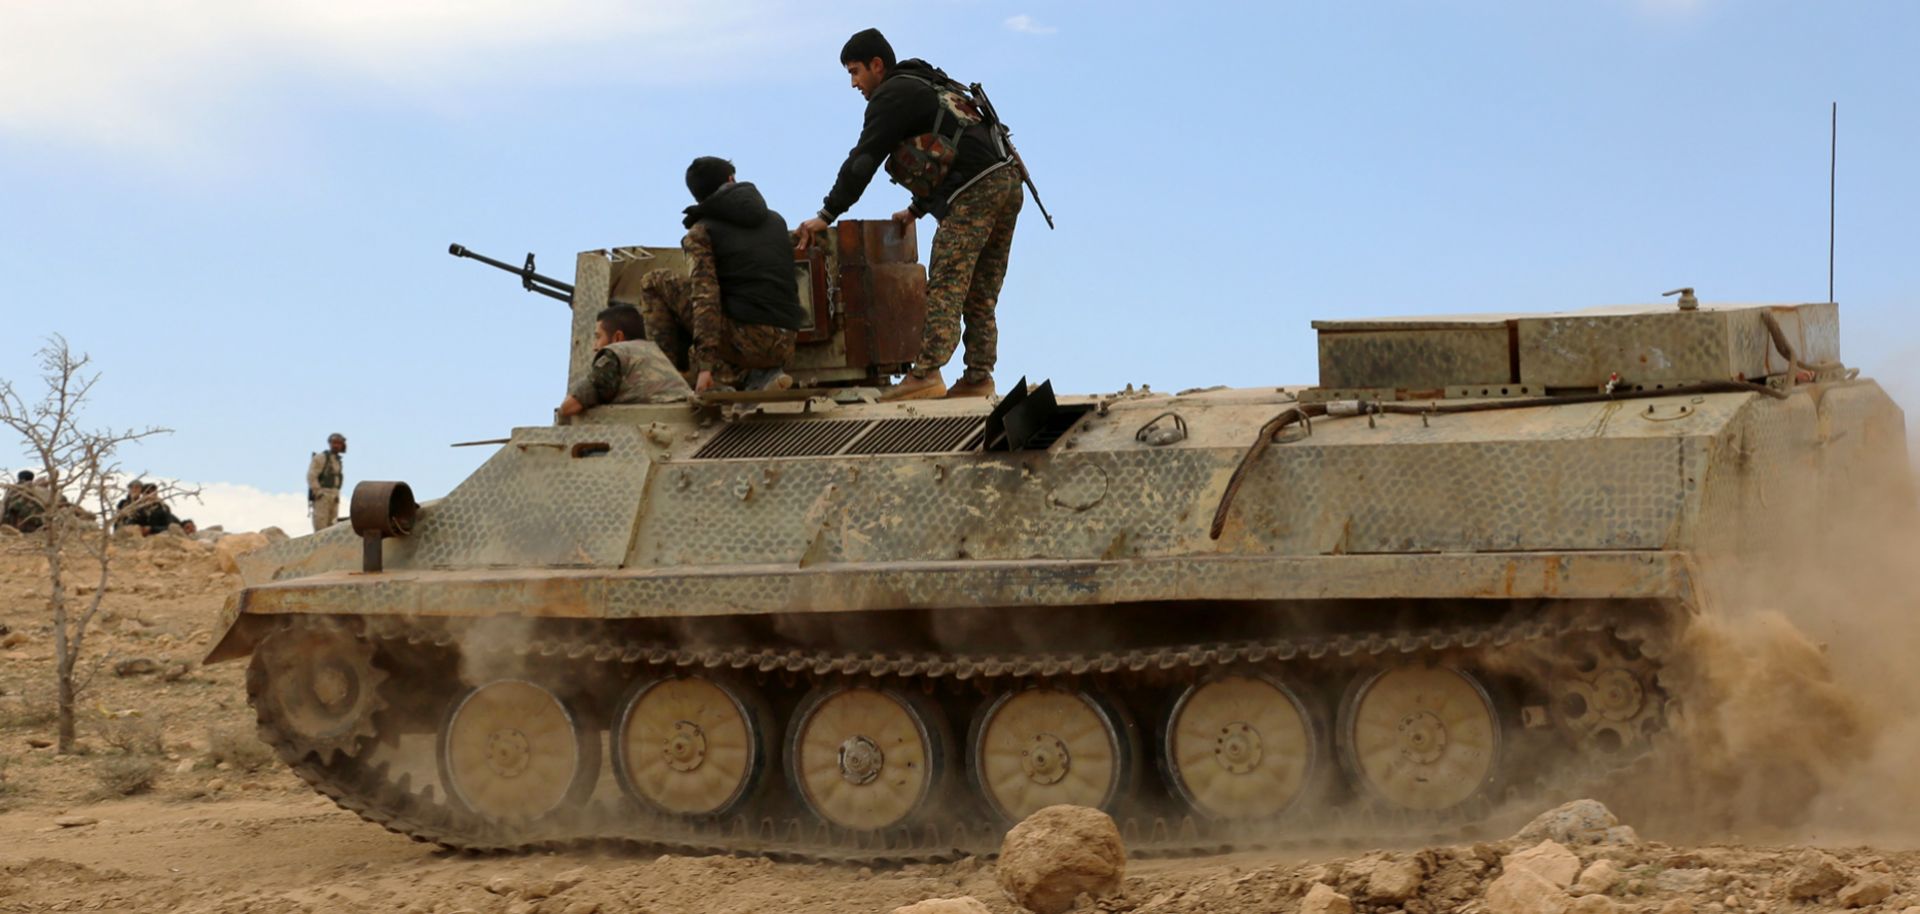 Fighters belonging to the Syrian Democratic Forces sit on an armored personnel carrier in al-Hasaka province on Feb. 19.